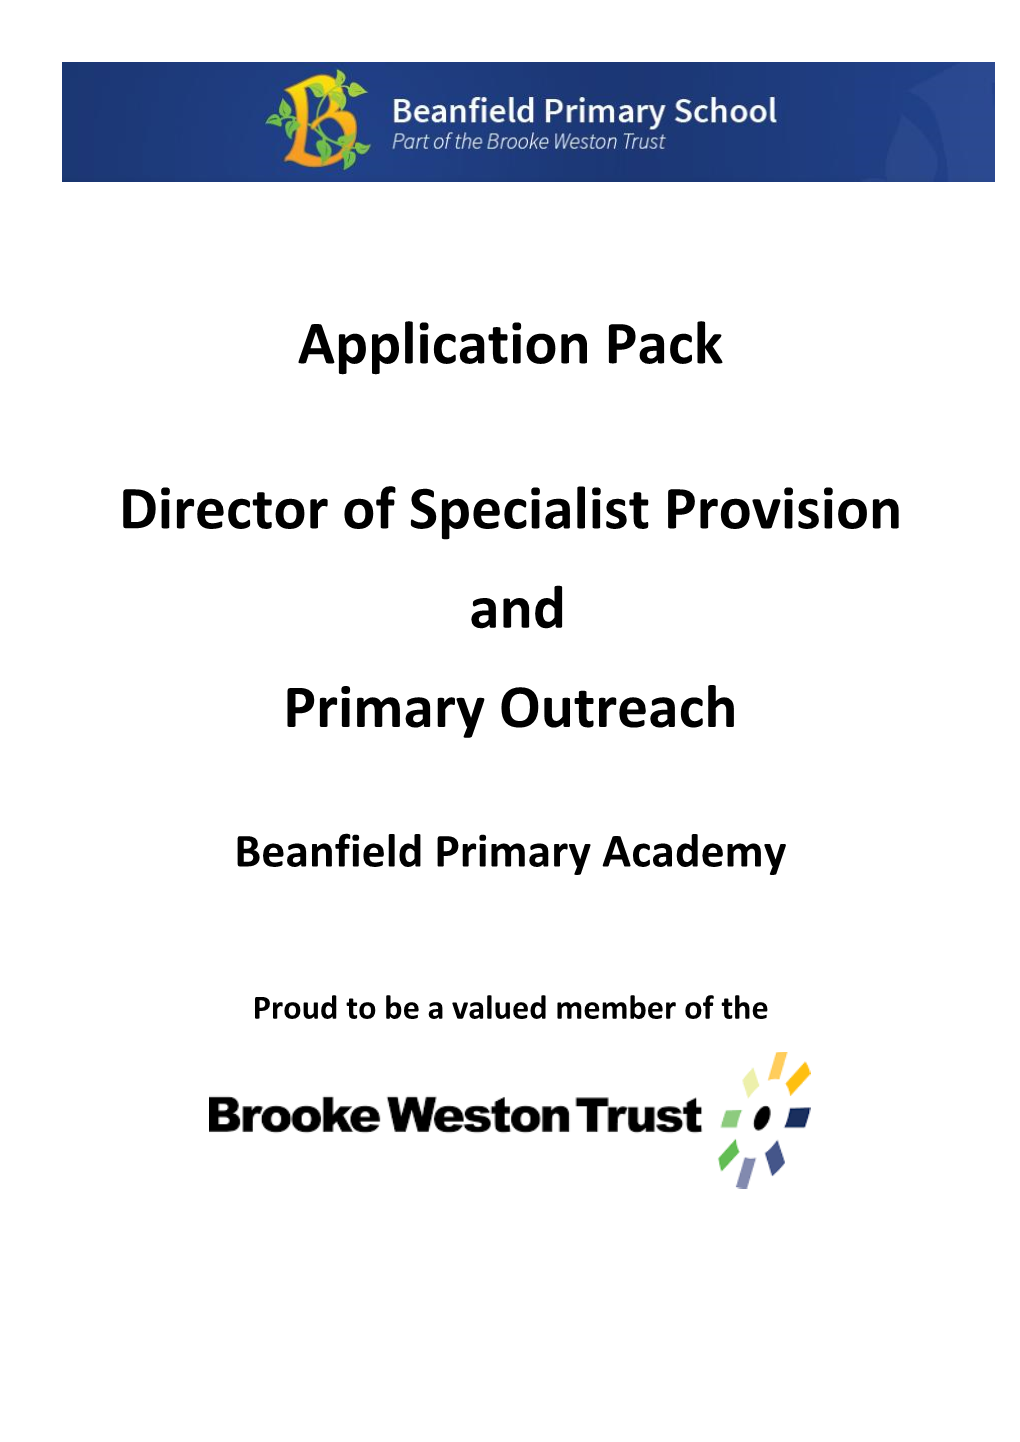 Application Pack Director of Specialist Provision and Primary Outreach